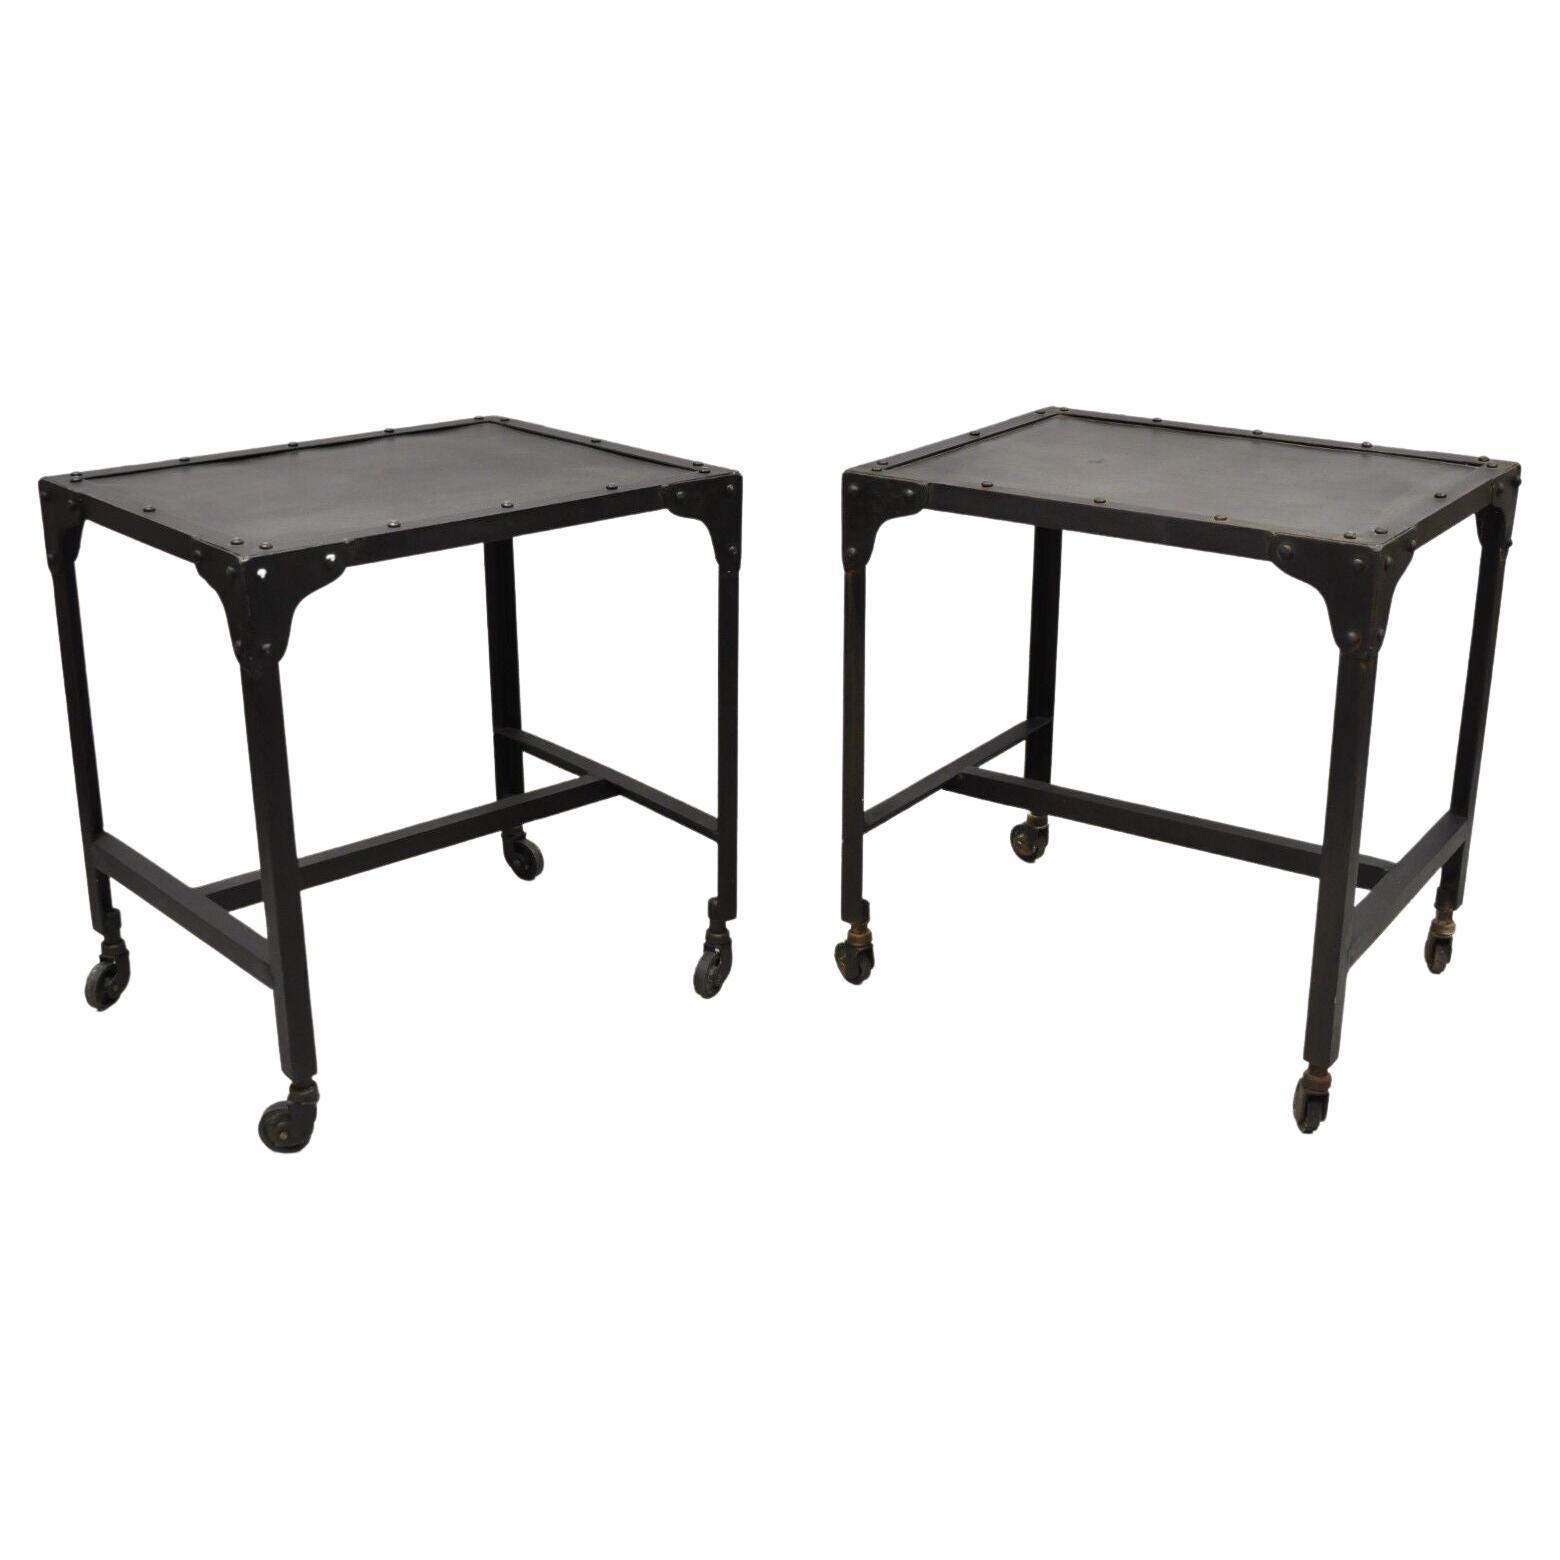 Decorator Industrial Vintage Style Steel Metal Side Tables on Wheels, a Pair For Sale